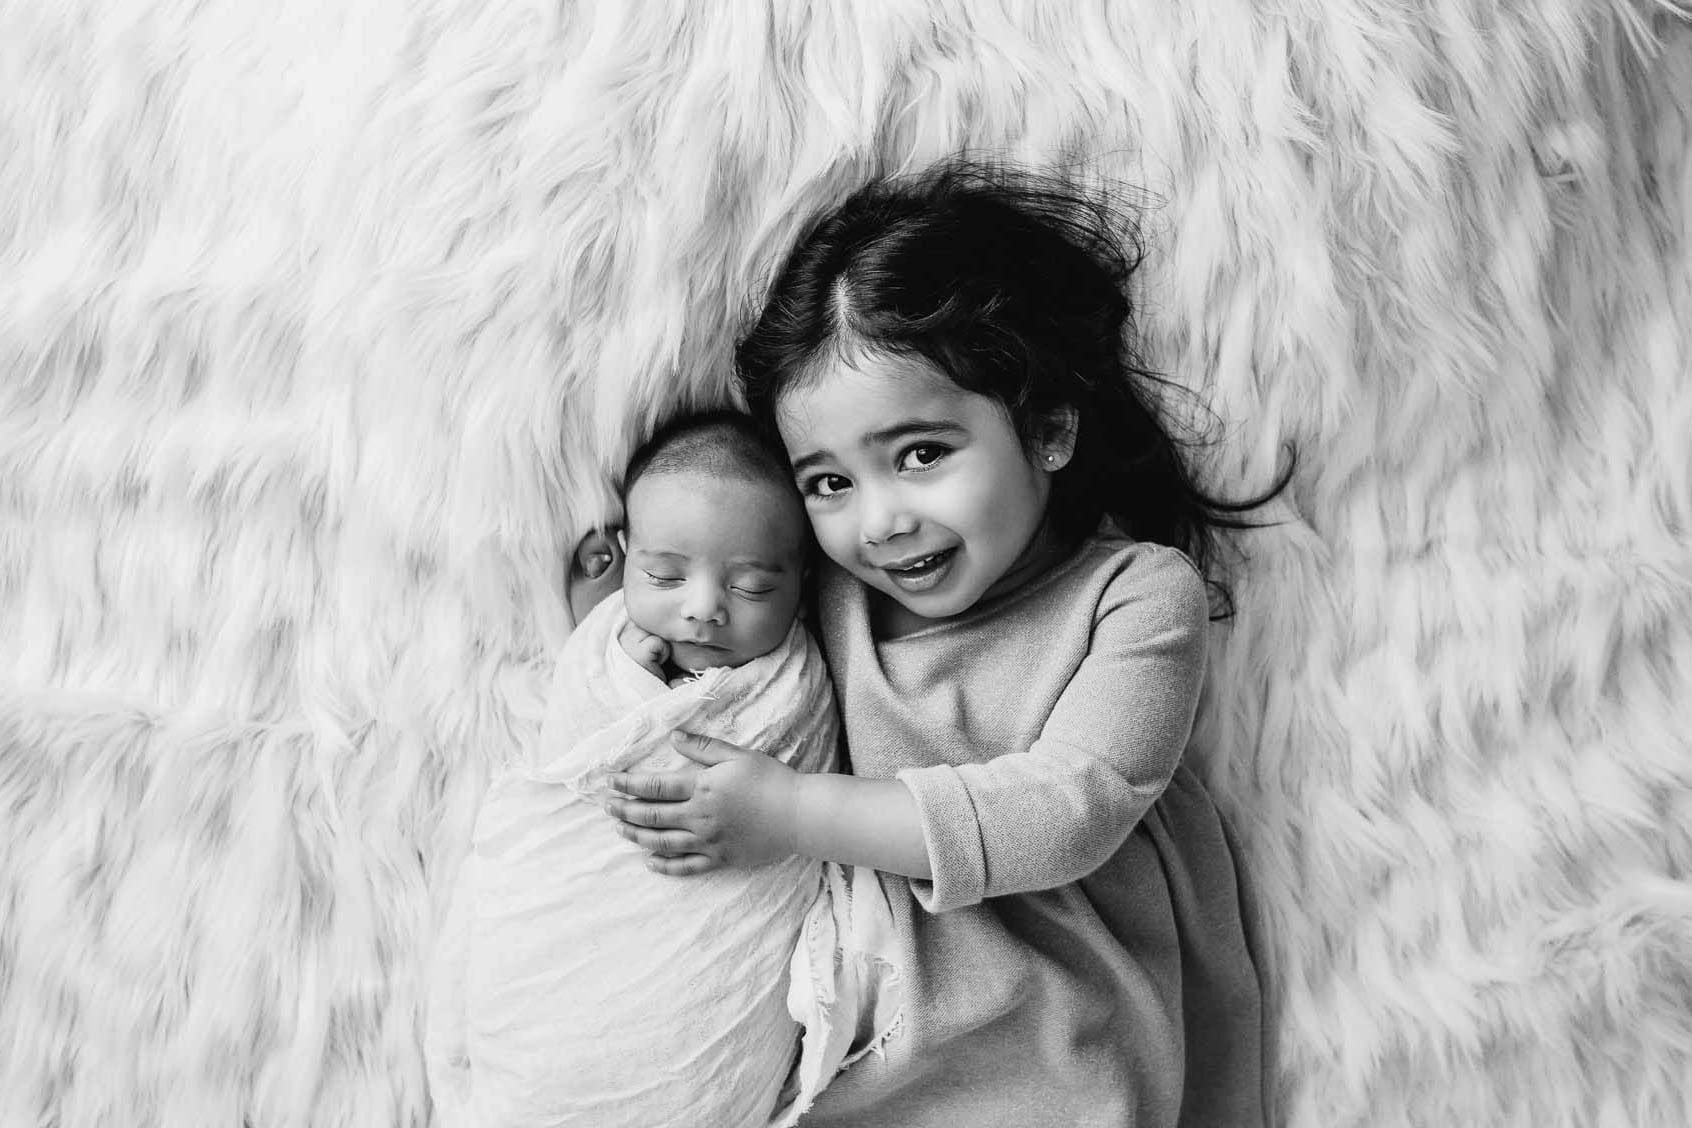 A little girl lays on a rug and cuddles her newborn baby brother